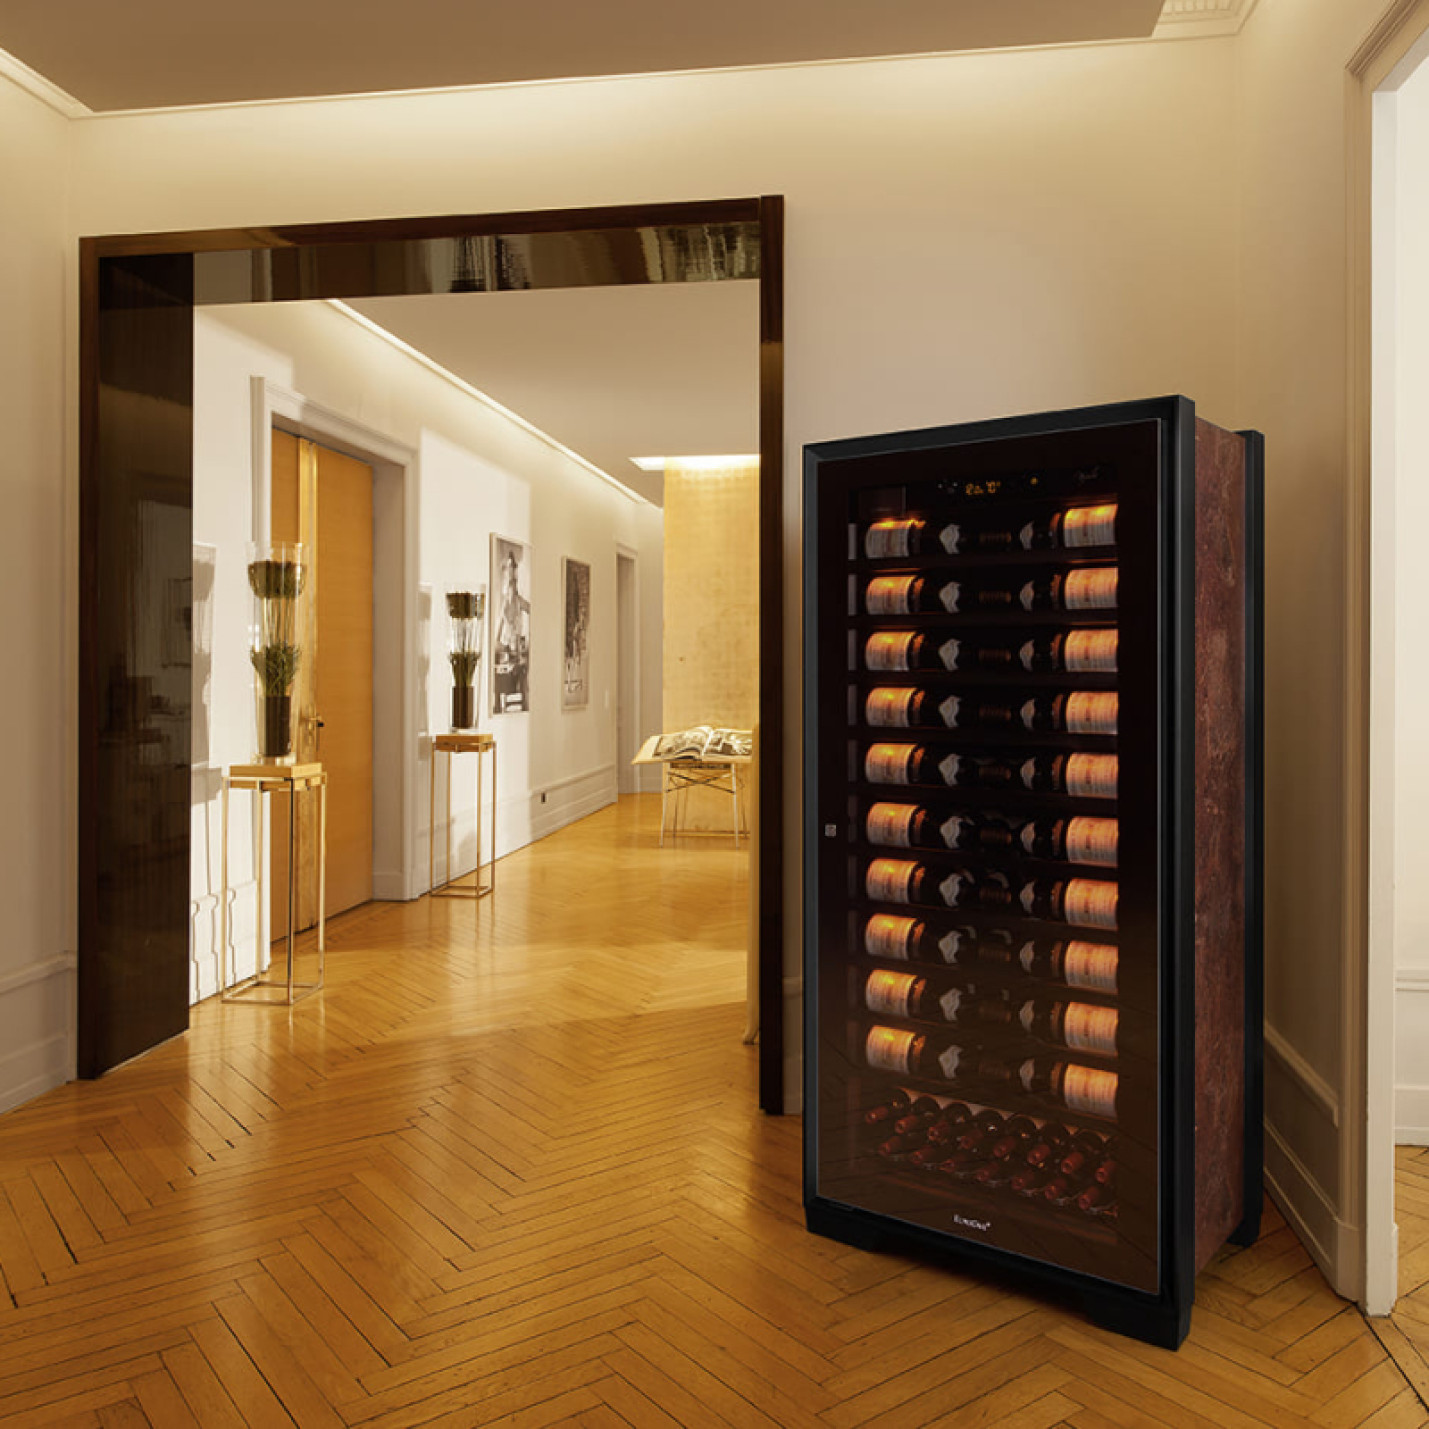 In a luxurious French apartment, the large Royale aging wine cabinet naturally finds its place among the works of art.